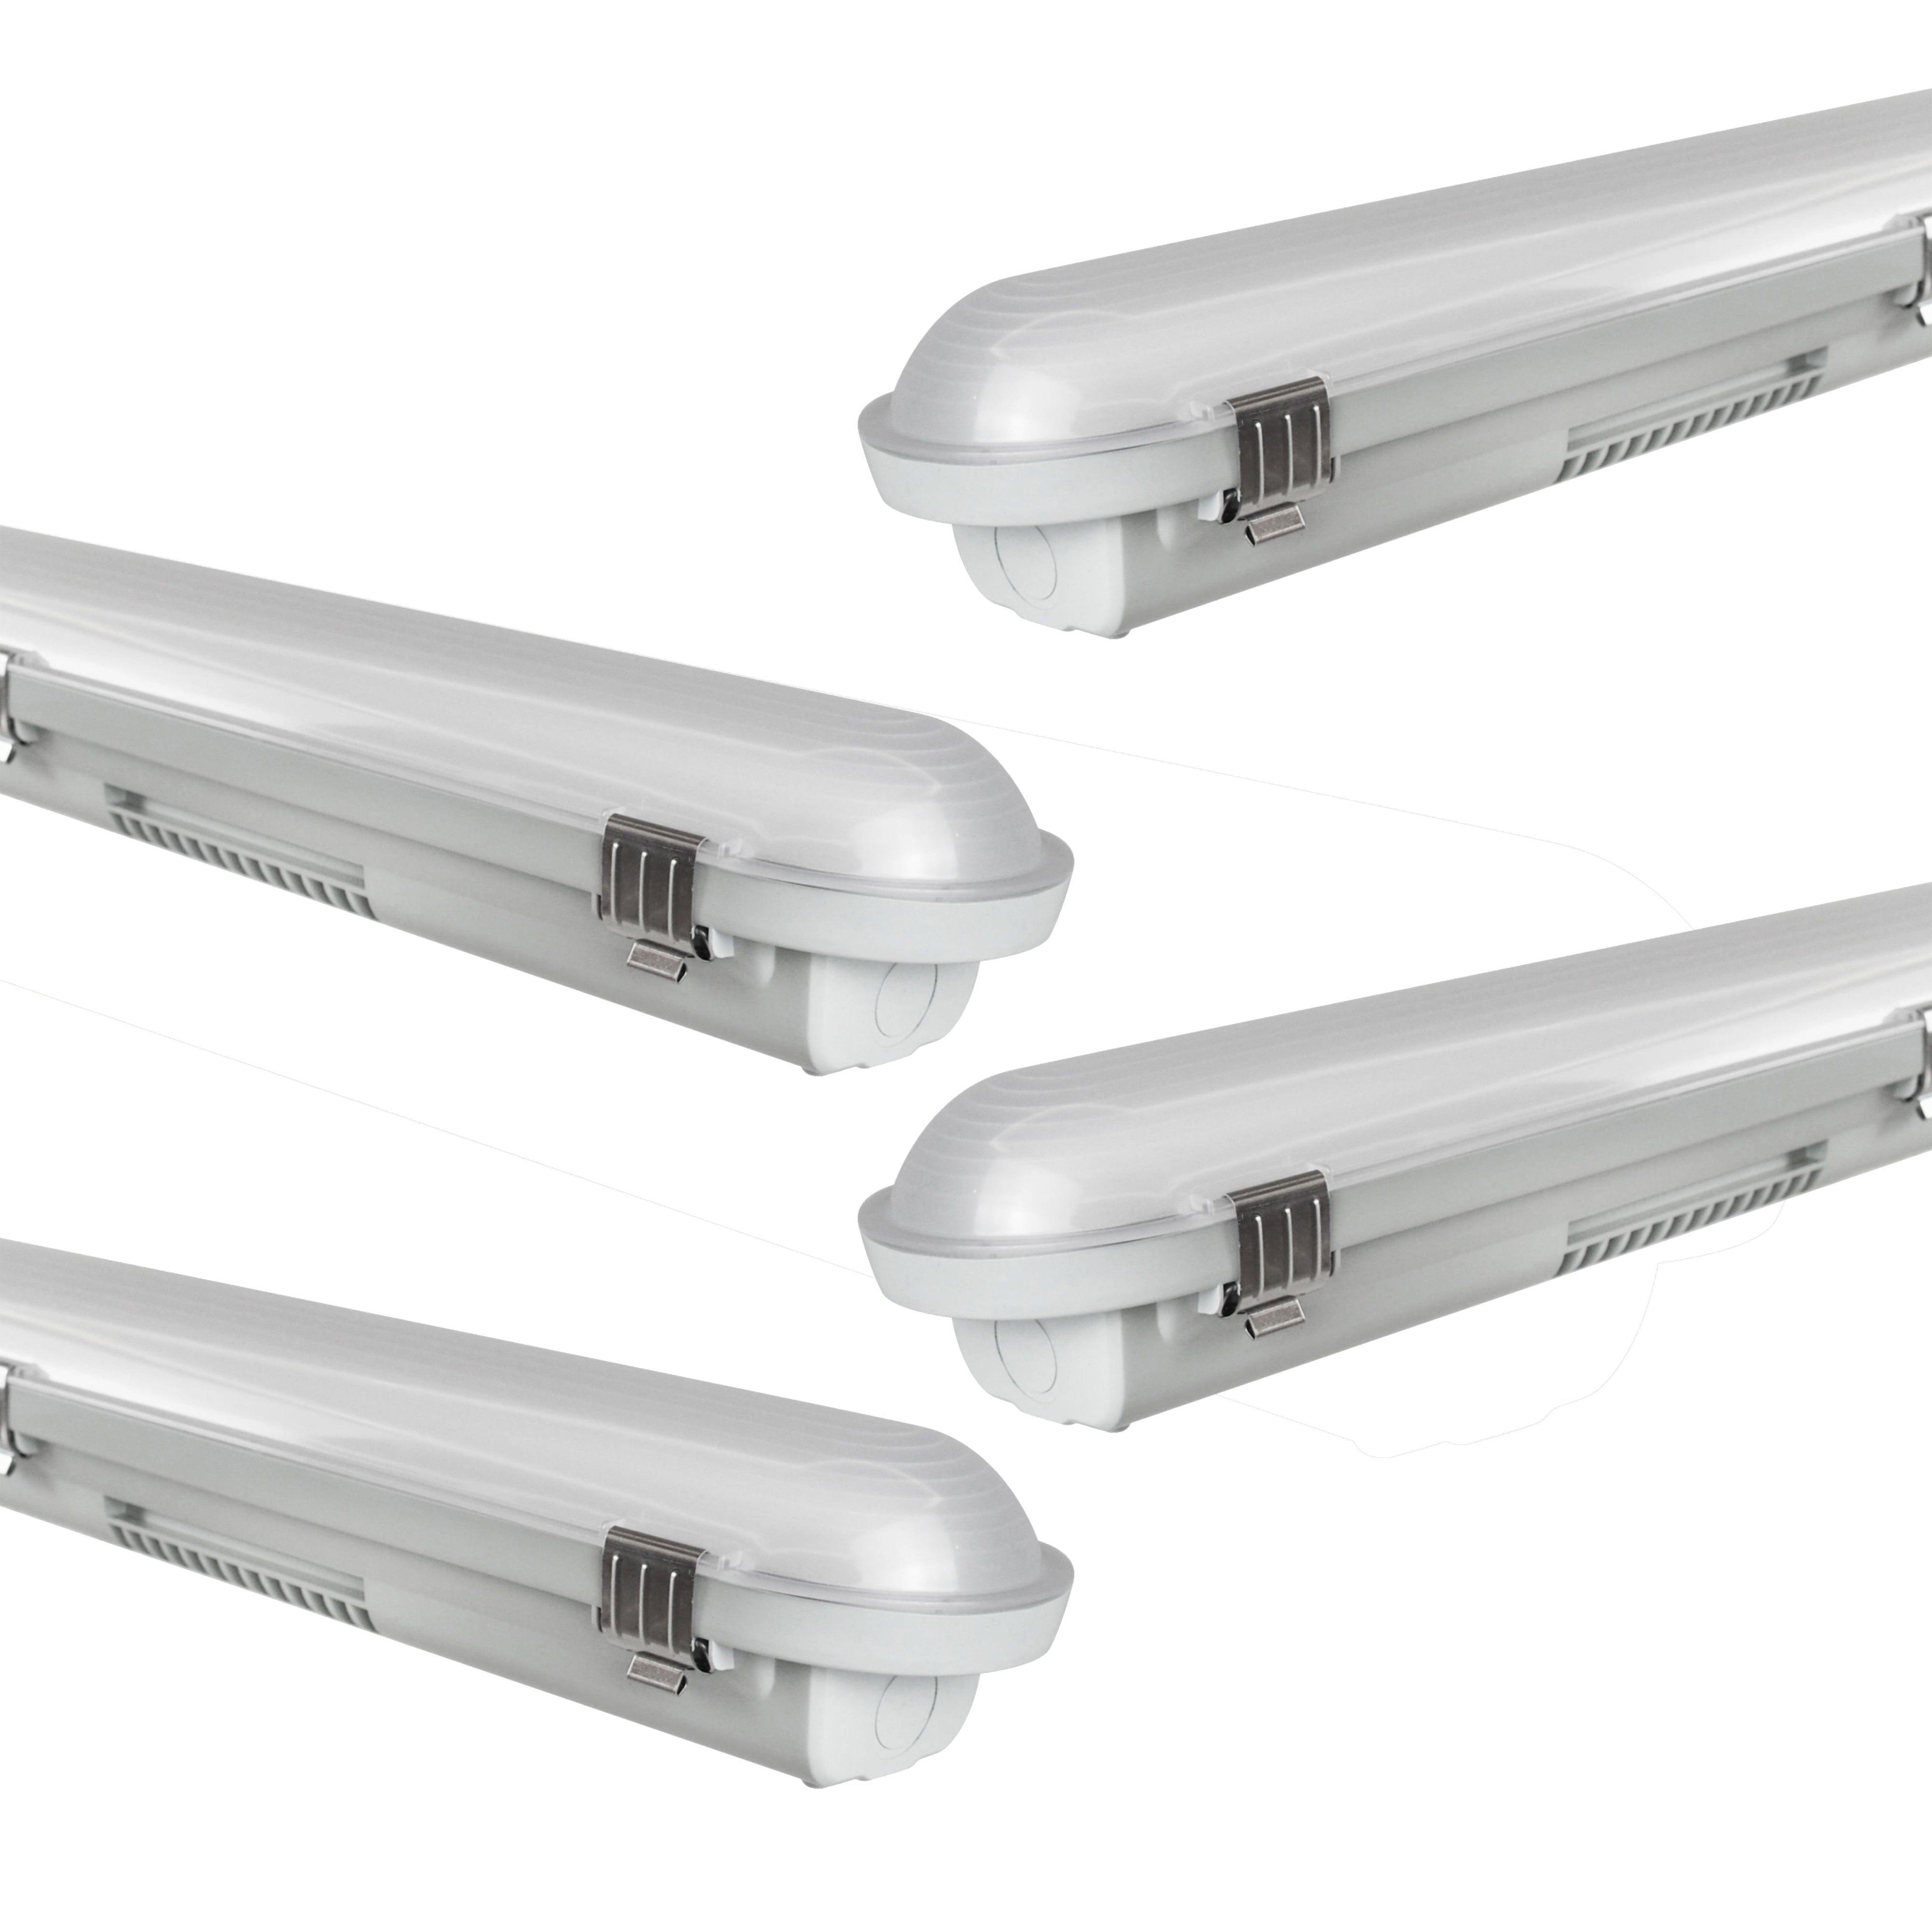 LED Non Corrosive IP65 Batten Fitting Light 150cms 50W 4000K, 6000 Lumens Ultra Bright, Up to 20000 Hours of Operation, Instant Start